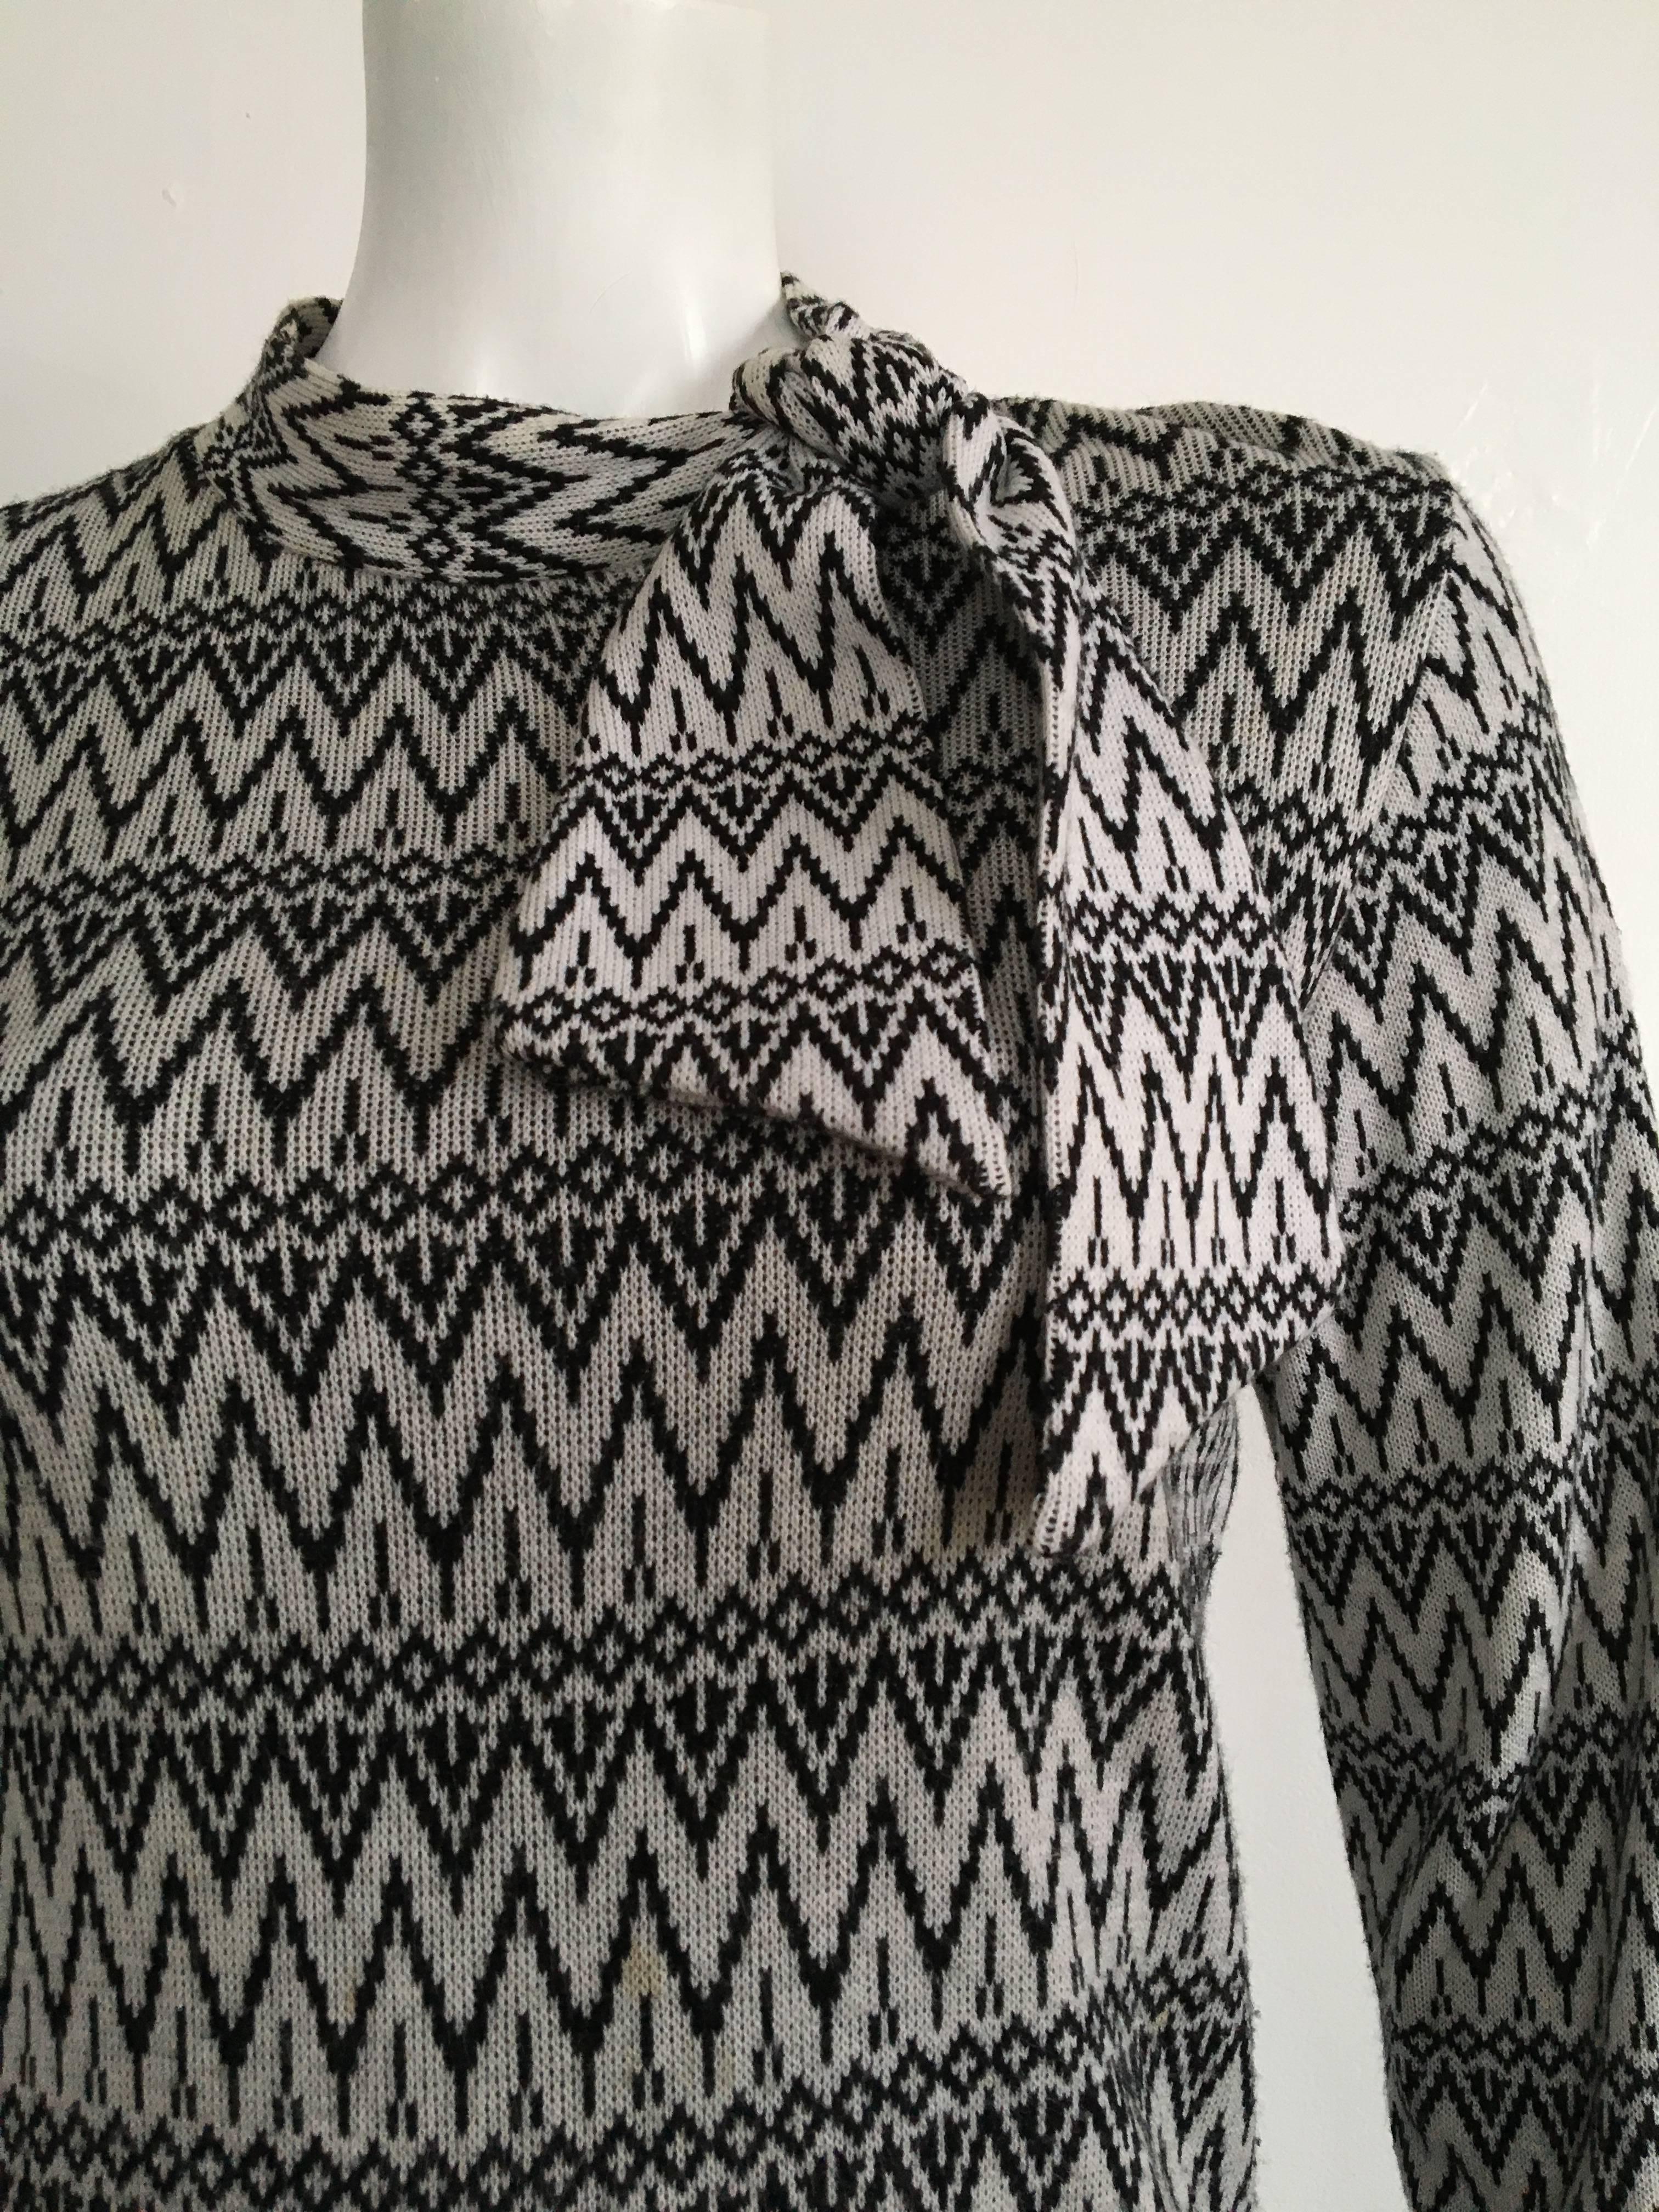 Susan Small 1970s Knit Maxi Long Dress Size 6/8. In Excellent Condition For Sale In Atlanta, GA